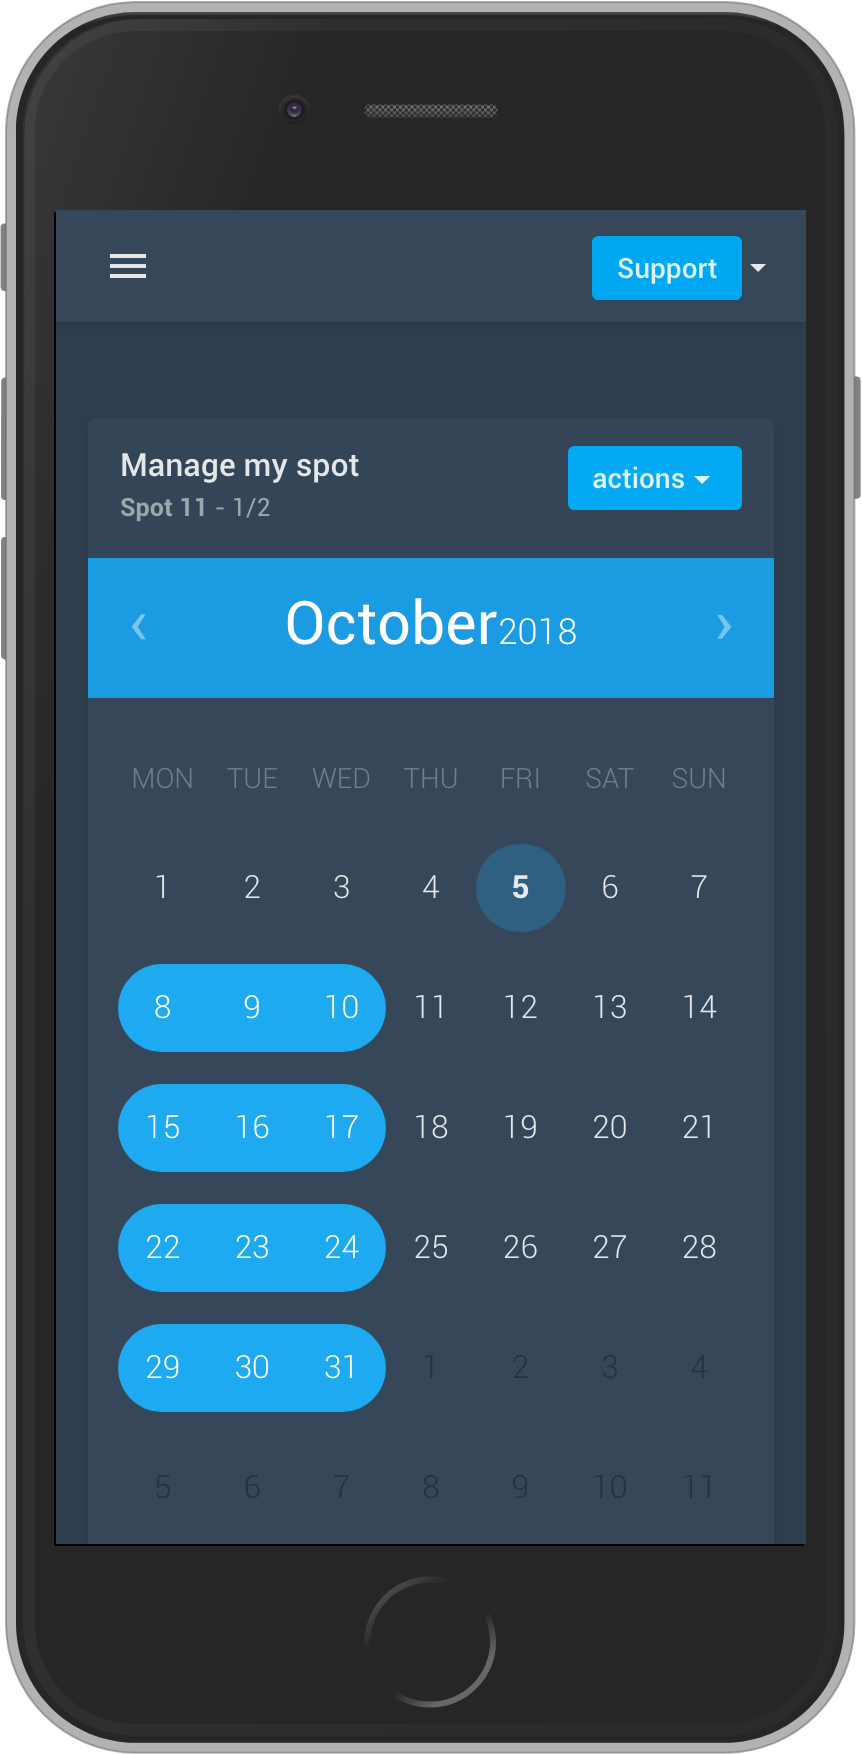 Owners of spaces can easily manage their reservations with a calendar view.